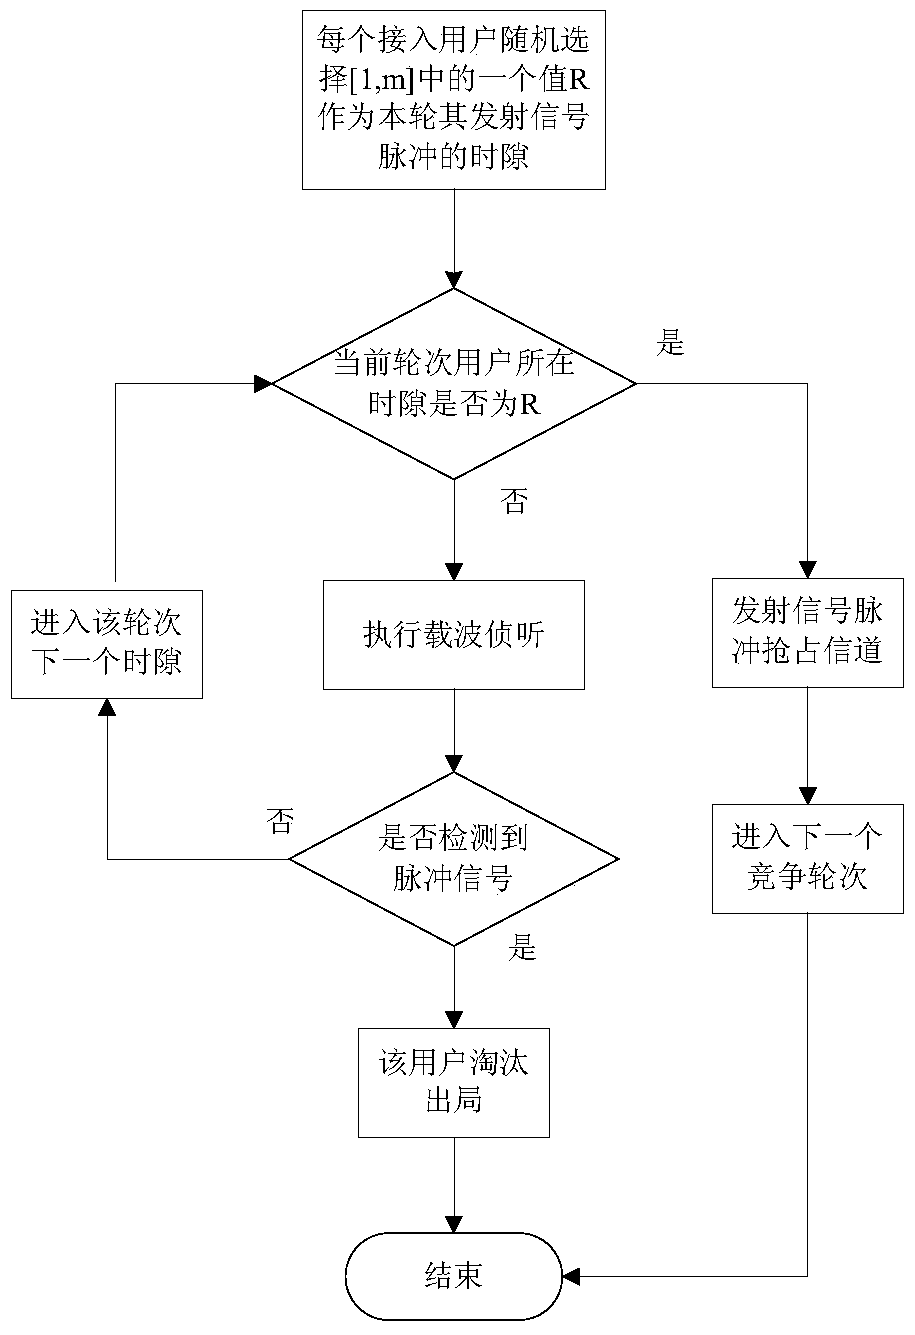 Access method of wireless local area network based on wheel-hugging degree